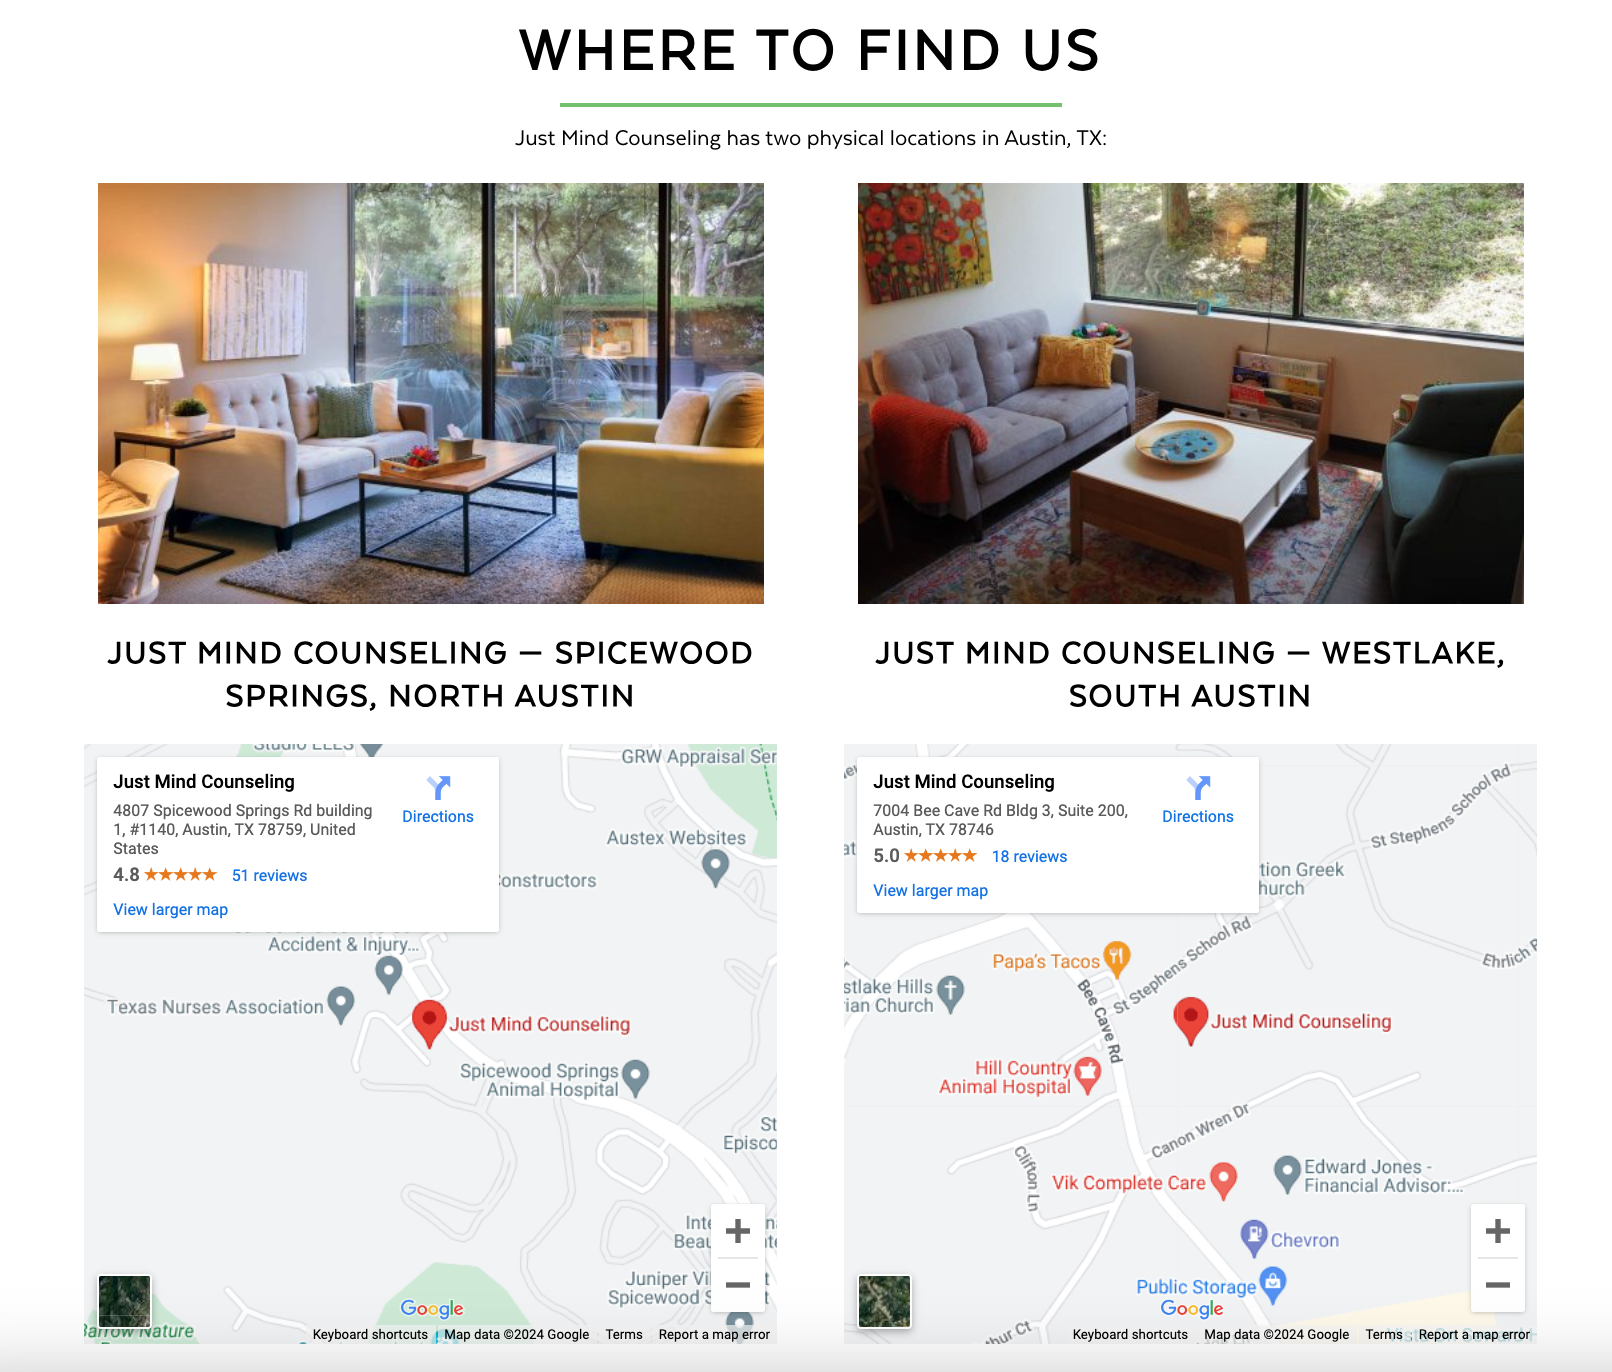 Example of internally linking location landing pages on service pages.